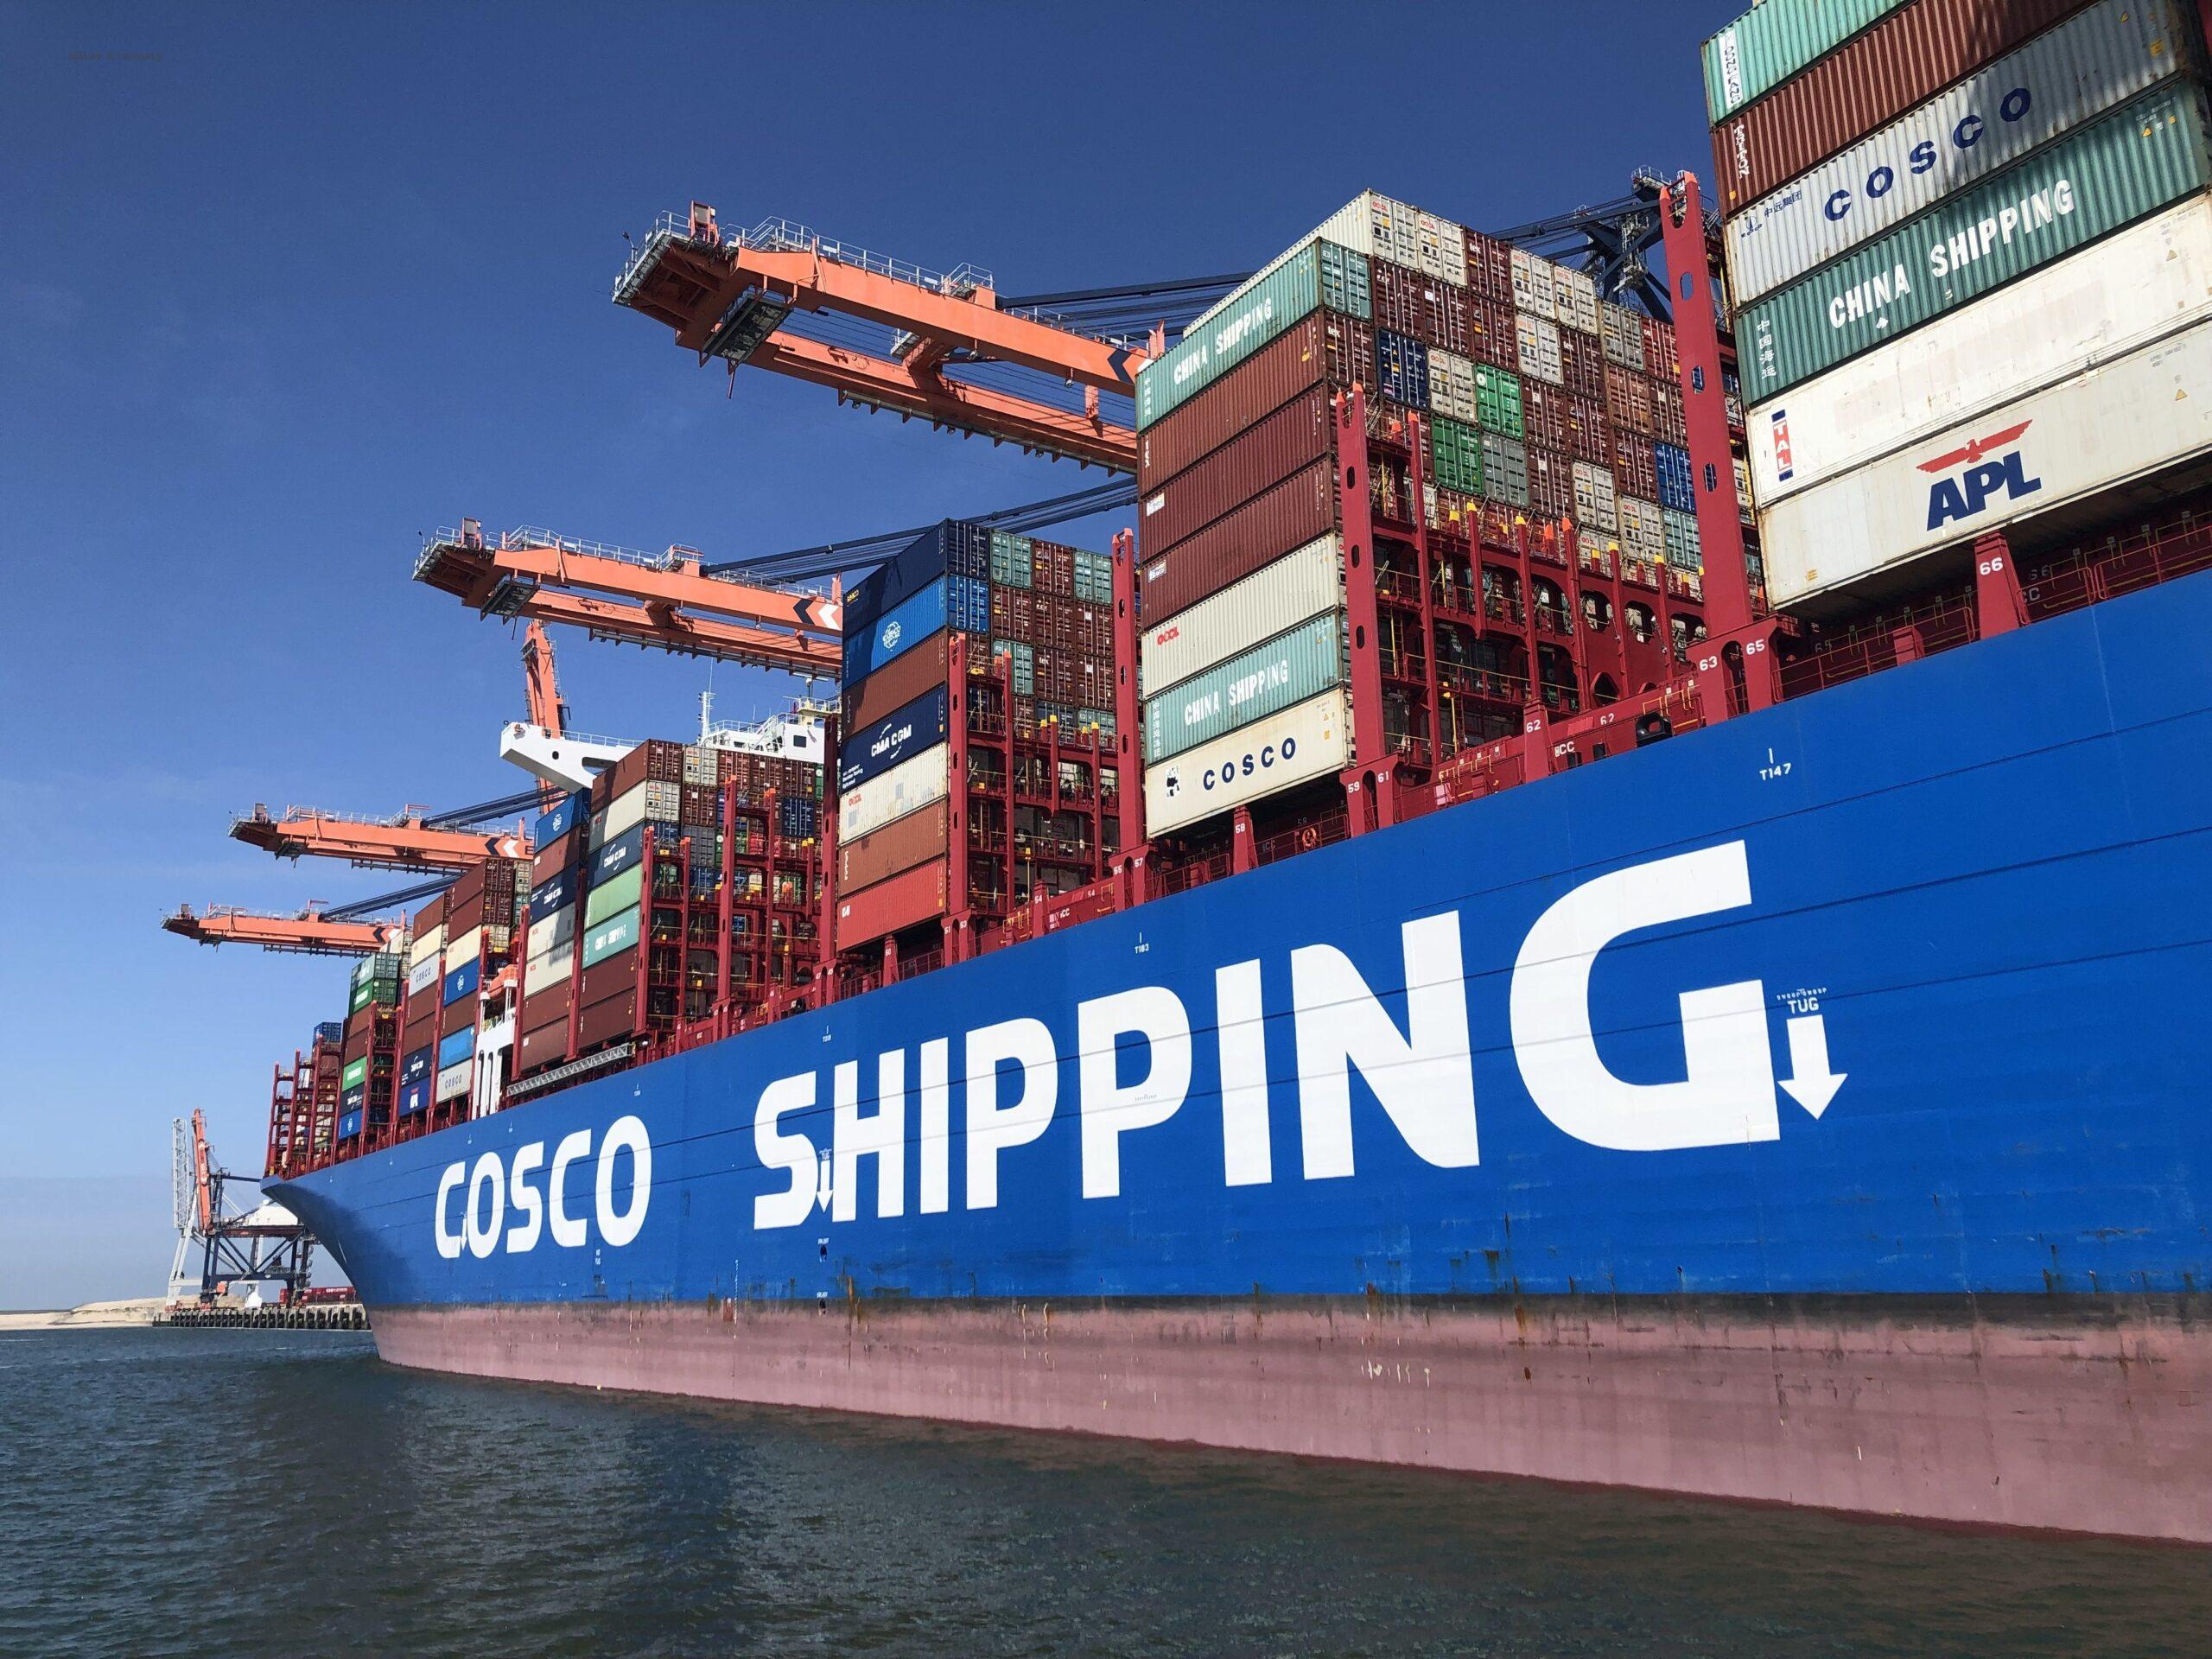 eBlue_economy_Cosco Shipping Orders 10 Containerships for $1.5 Billion